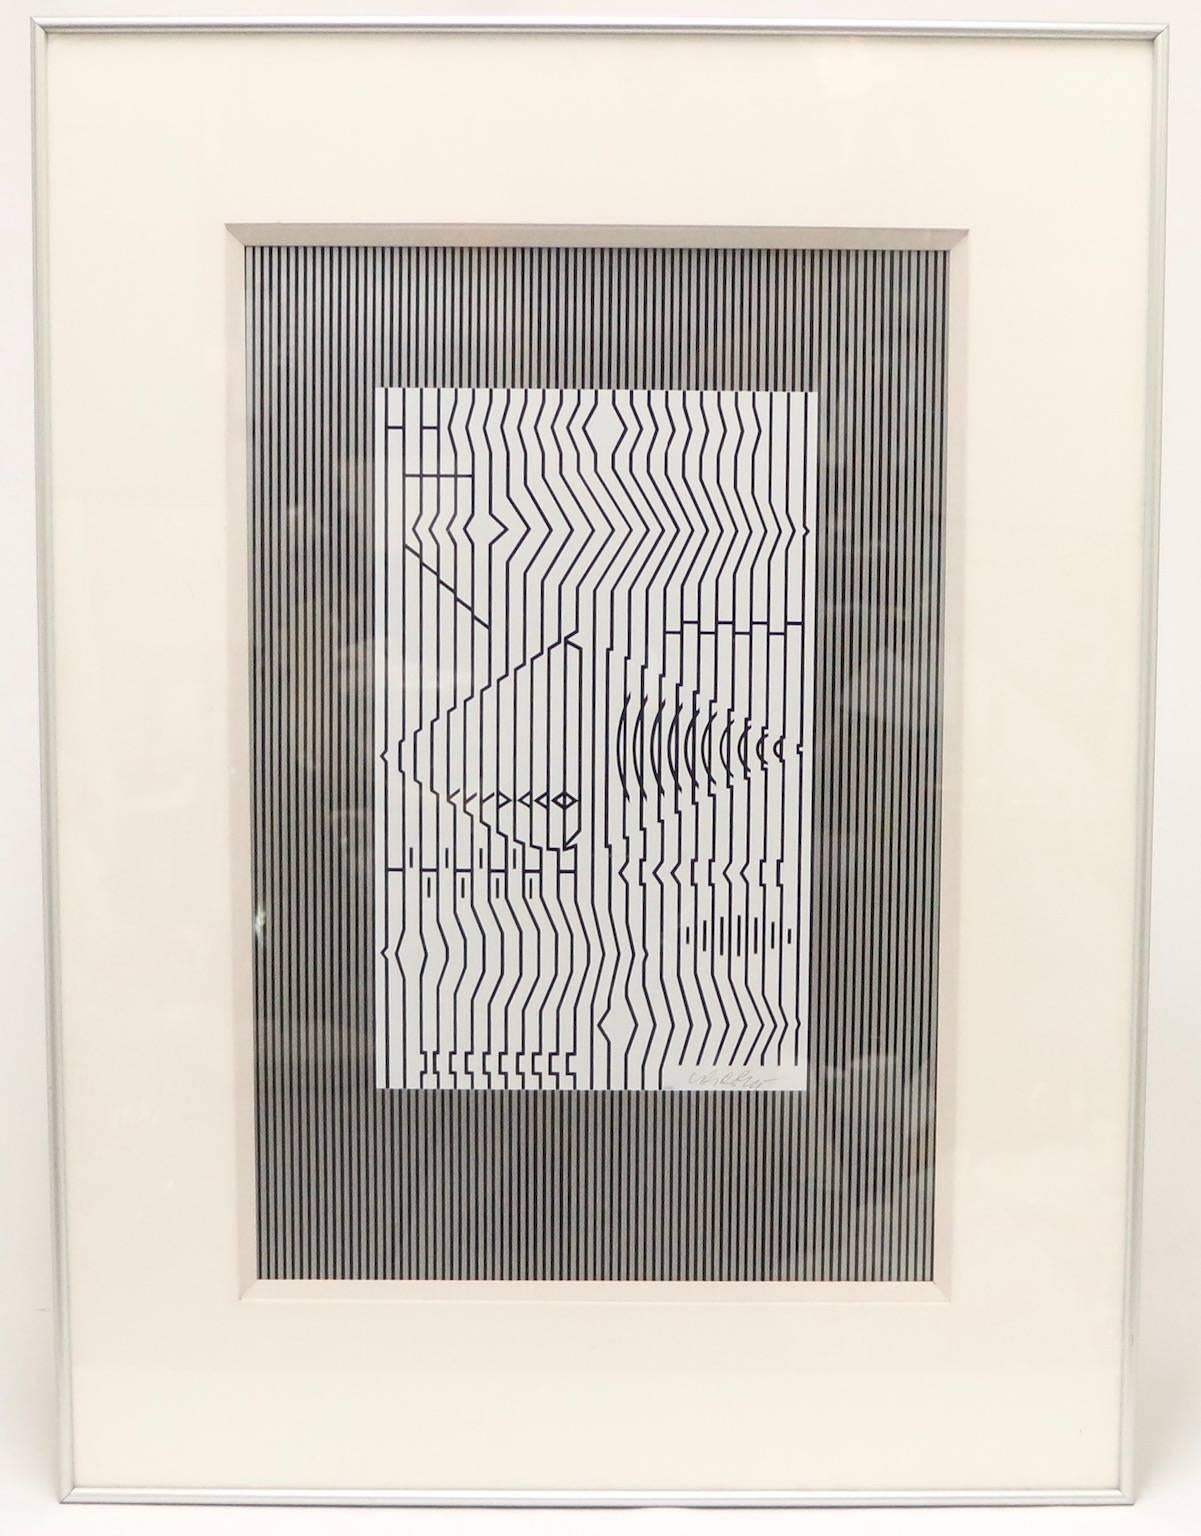 Minimalist Victor Vasarely Op-Art Serigraph Titled 'The Guitar'